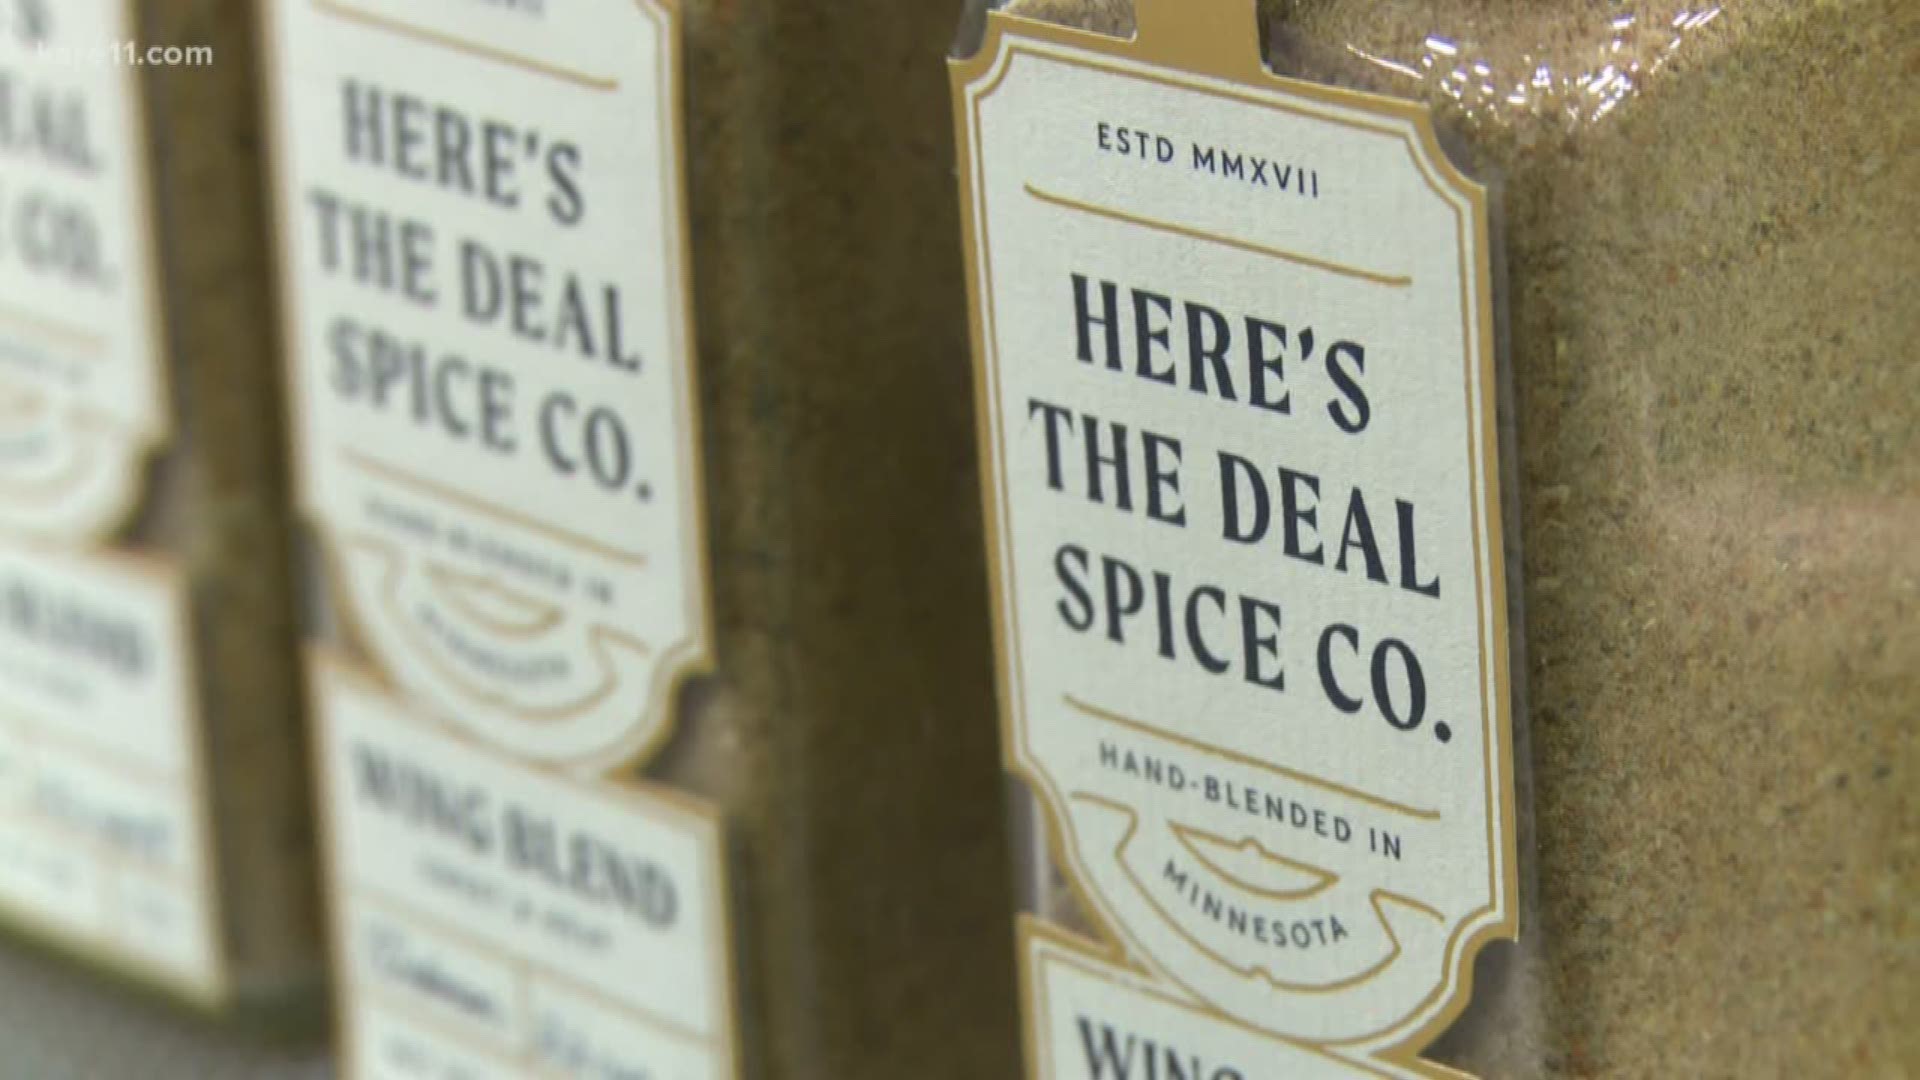 The Minneapolis Home and Garden show features Here's The Deal Spice Co. started by a Plymouth couple looking to bring chef quality flavors to everyday cooking.